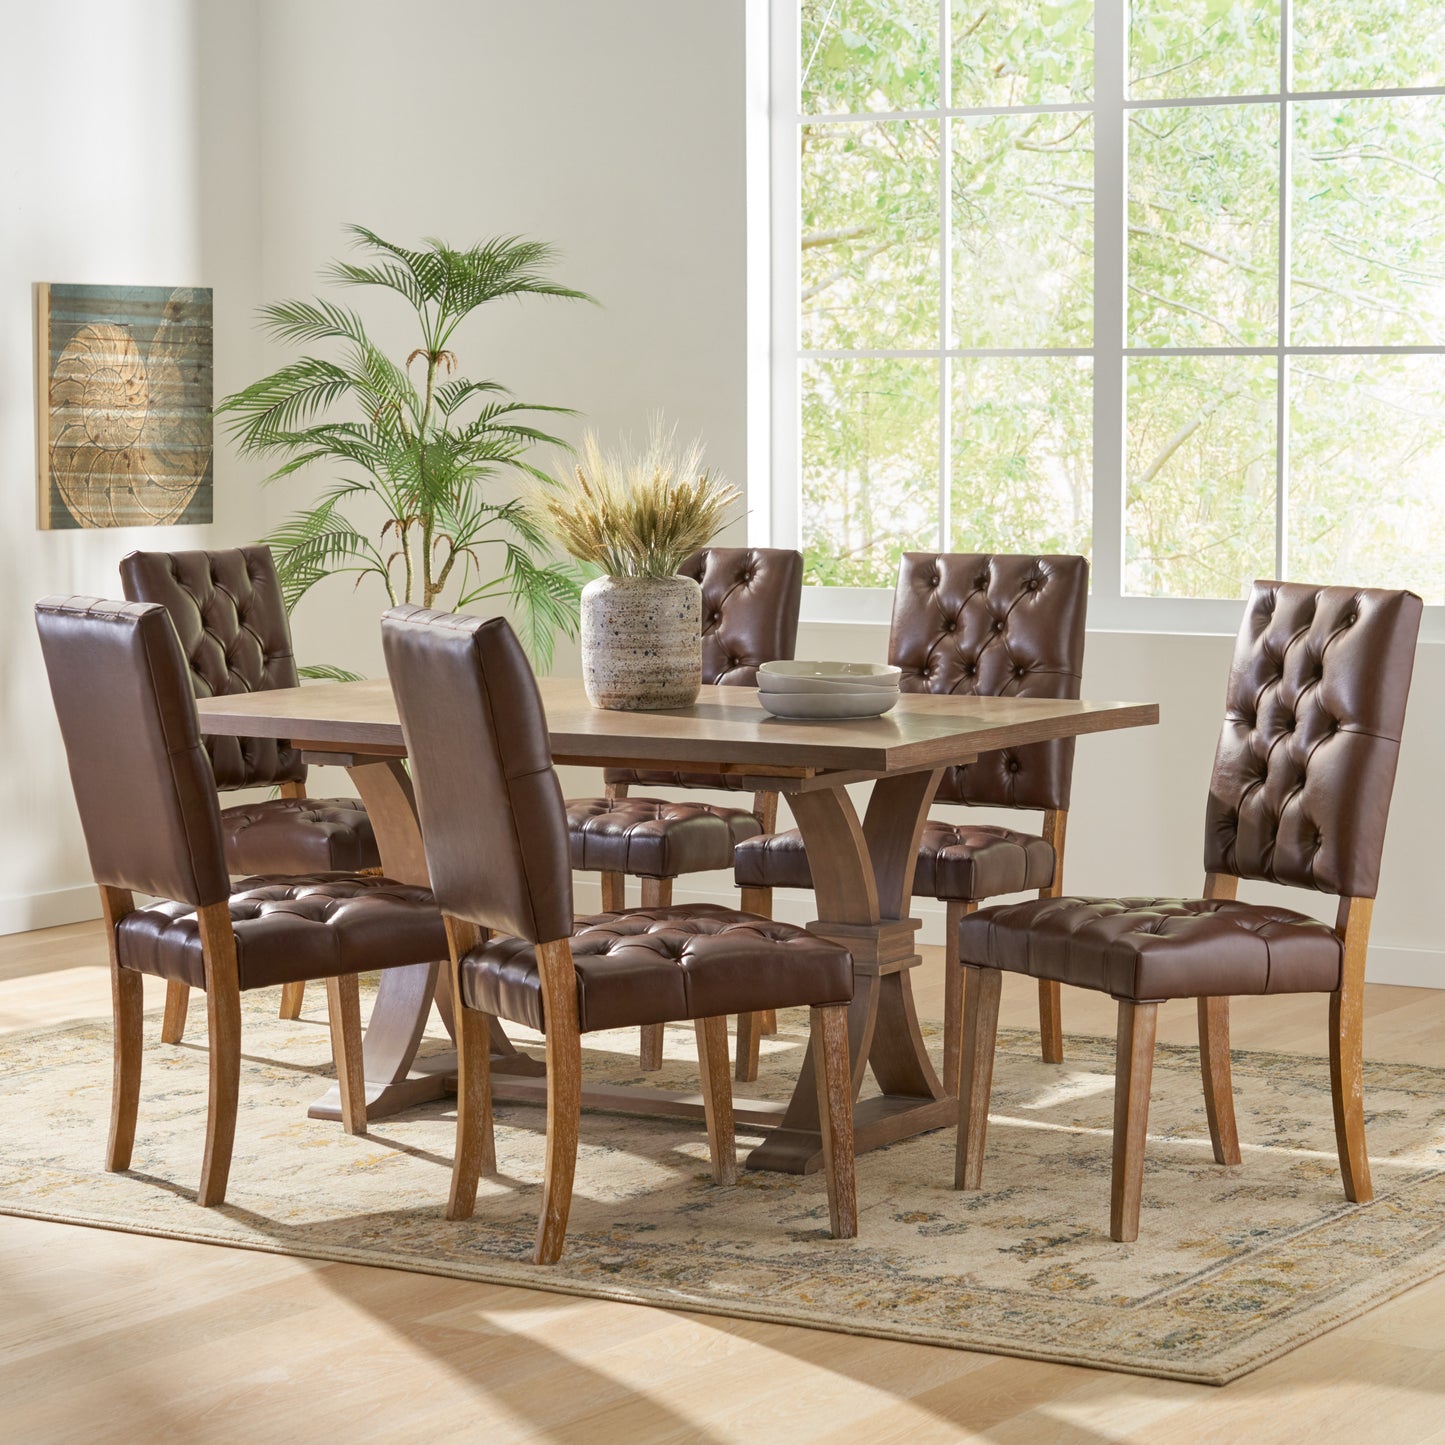 Welby Contemporary Tufted Dining Chairs, Set of 6